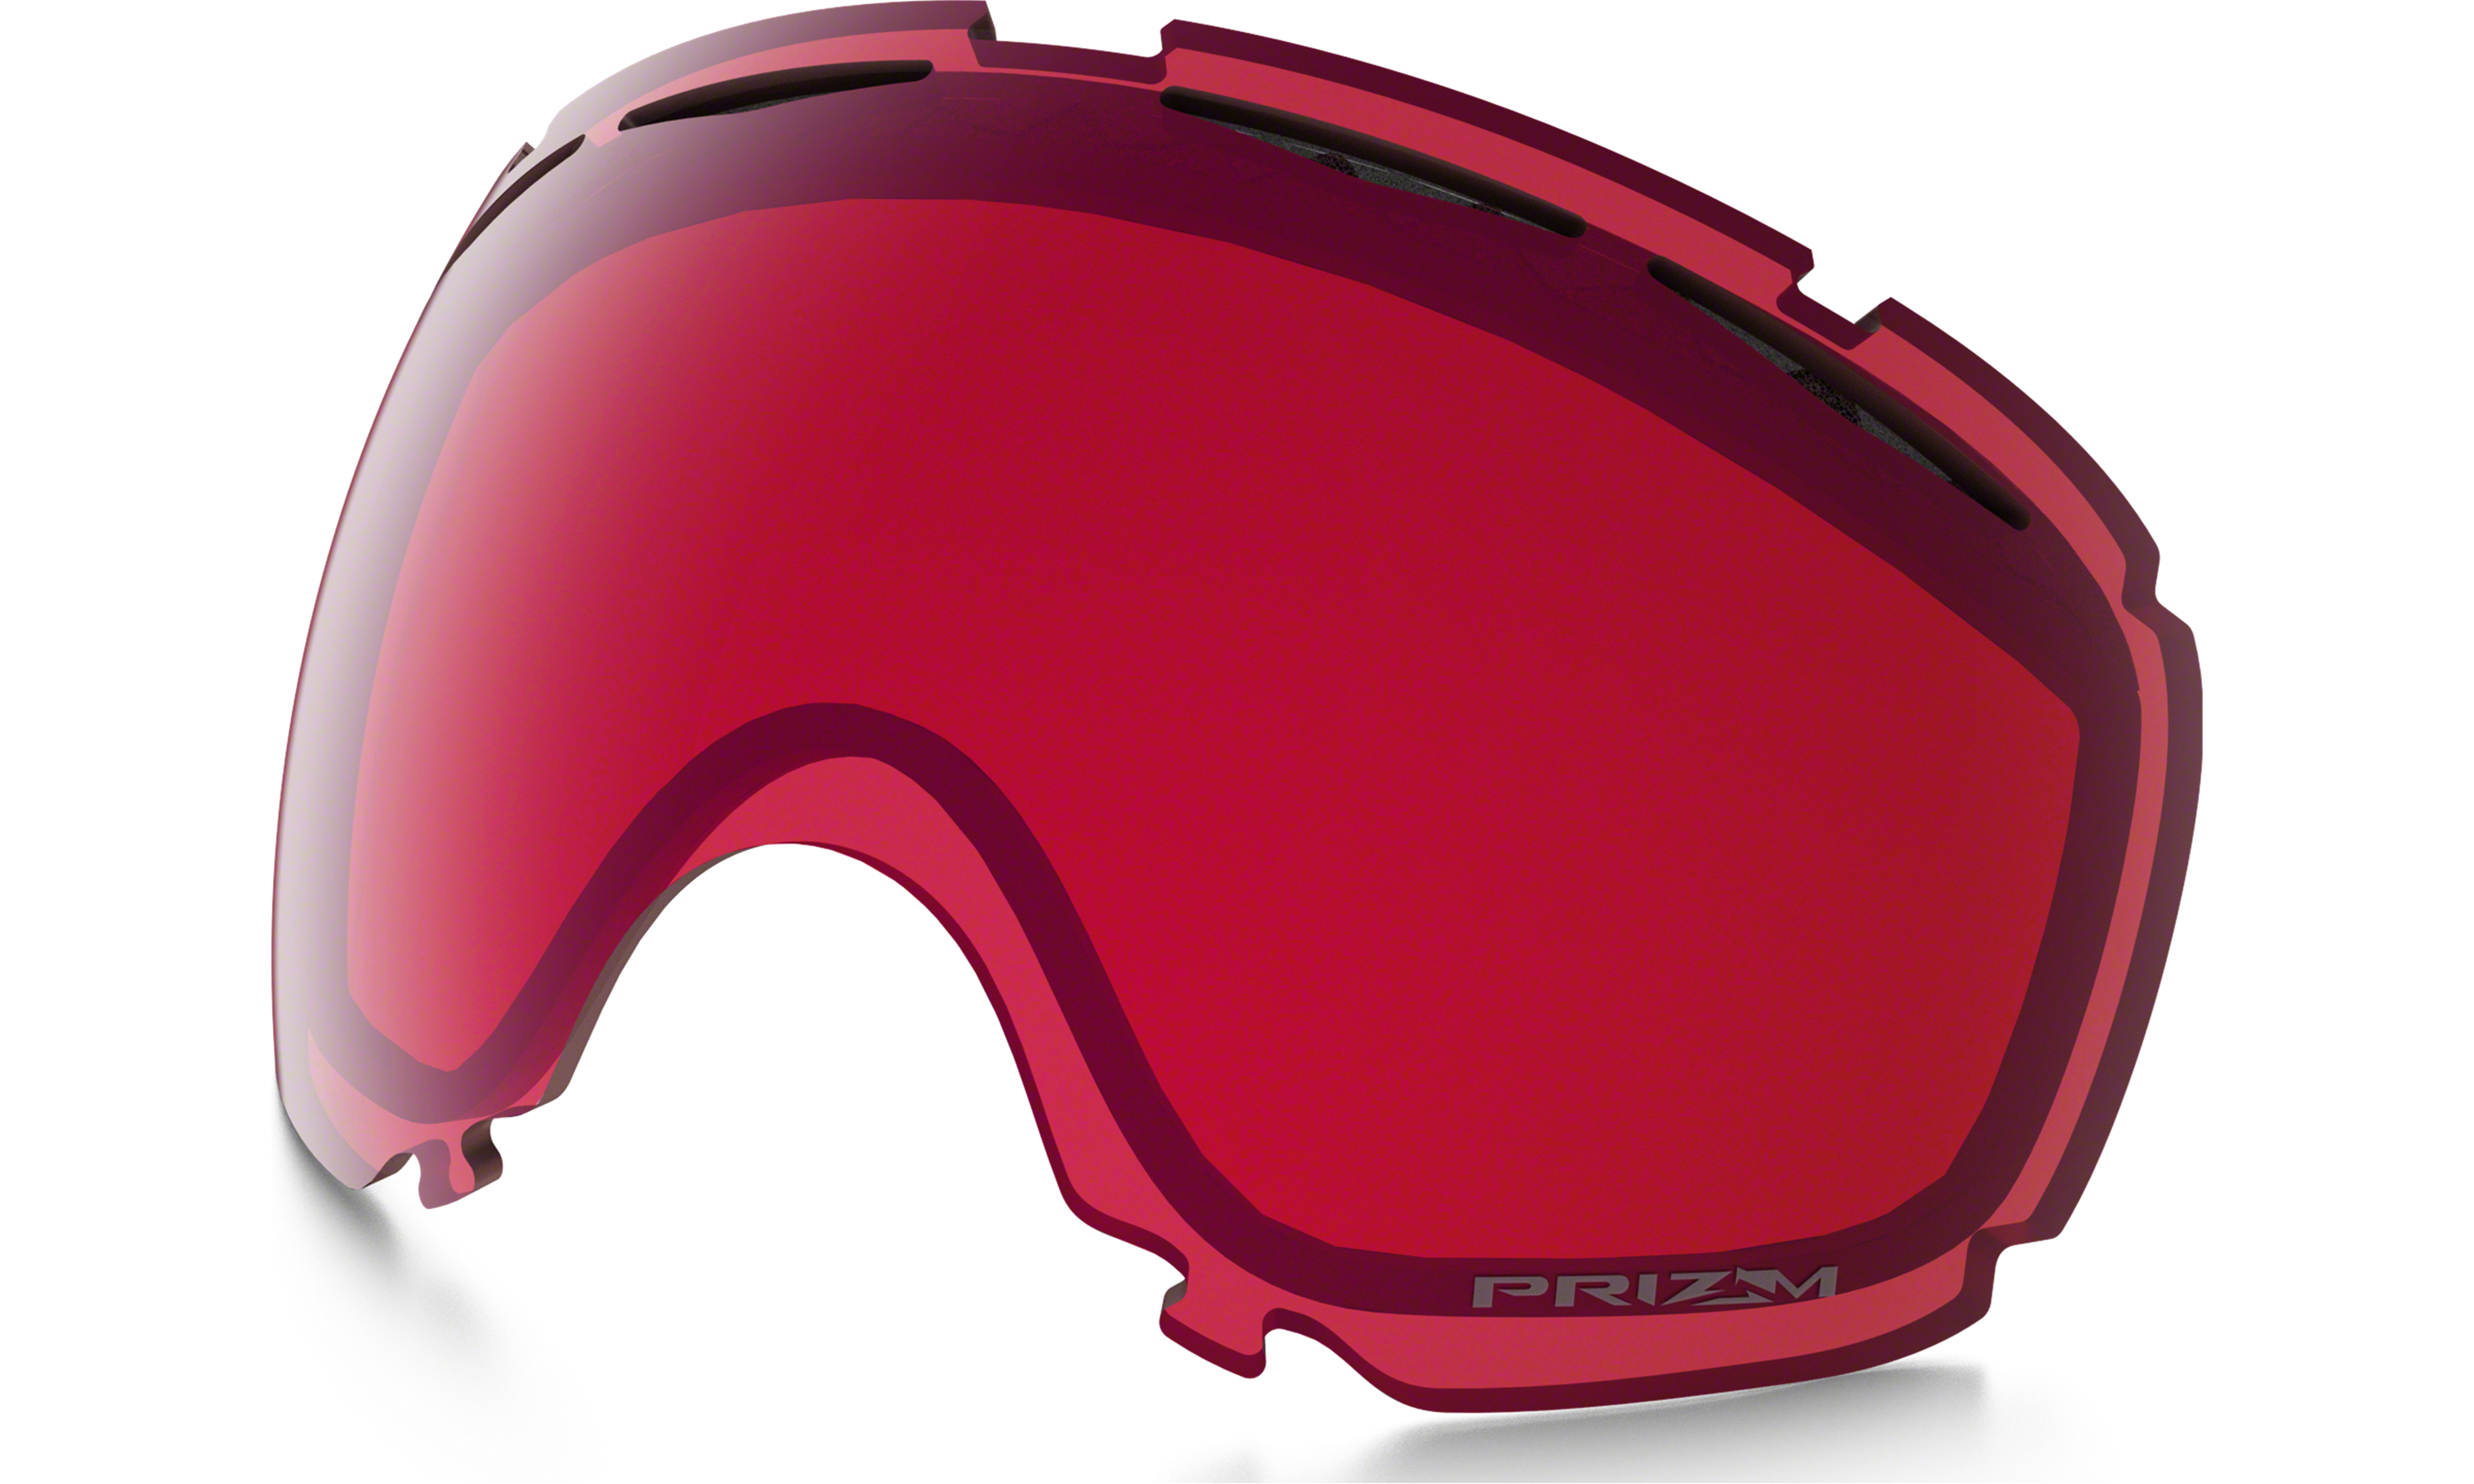 oakley canopy replacement lenses